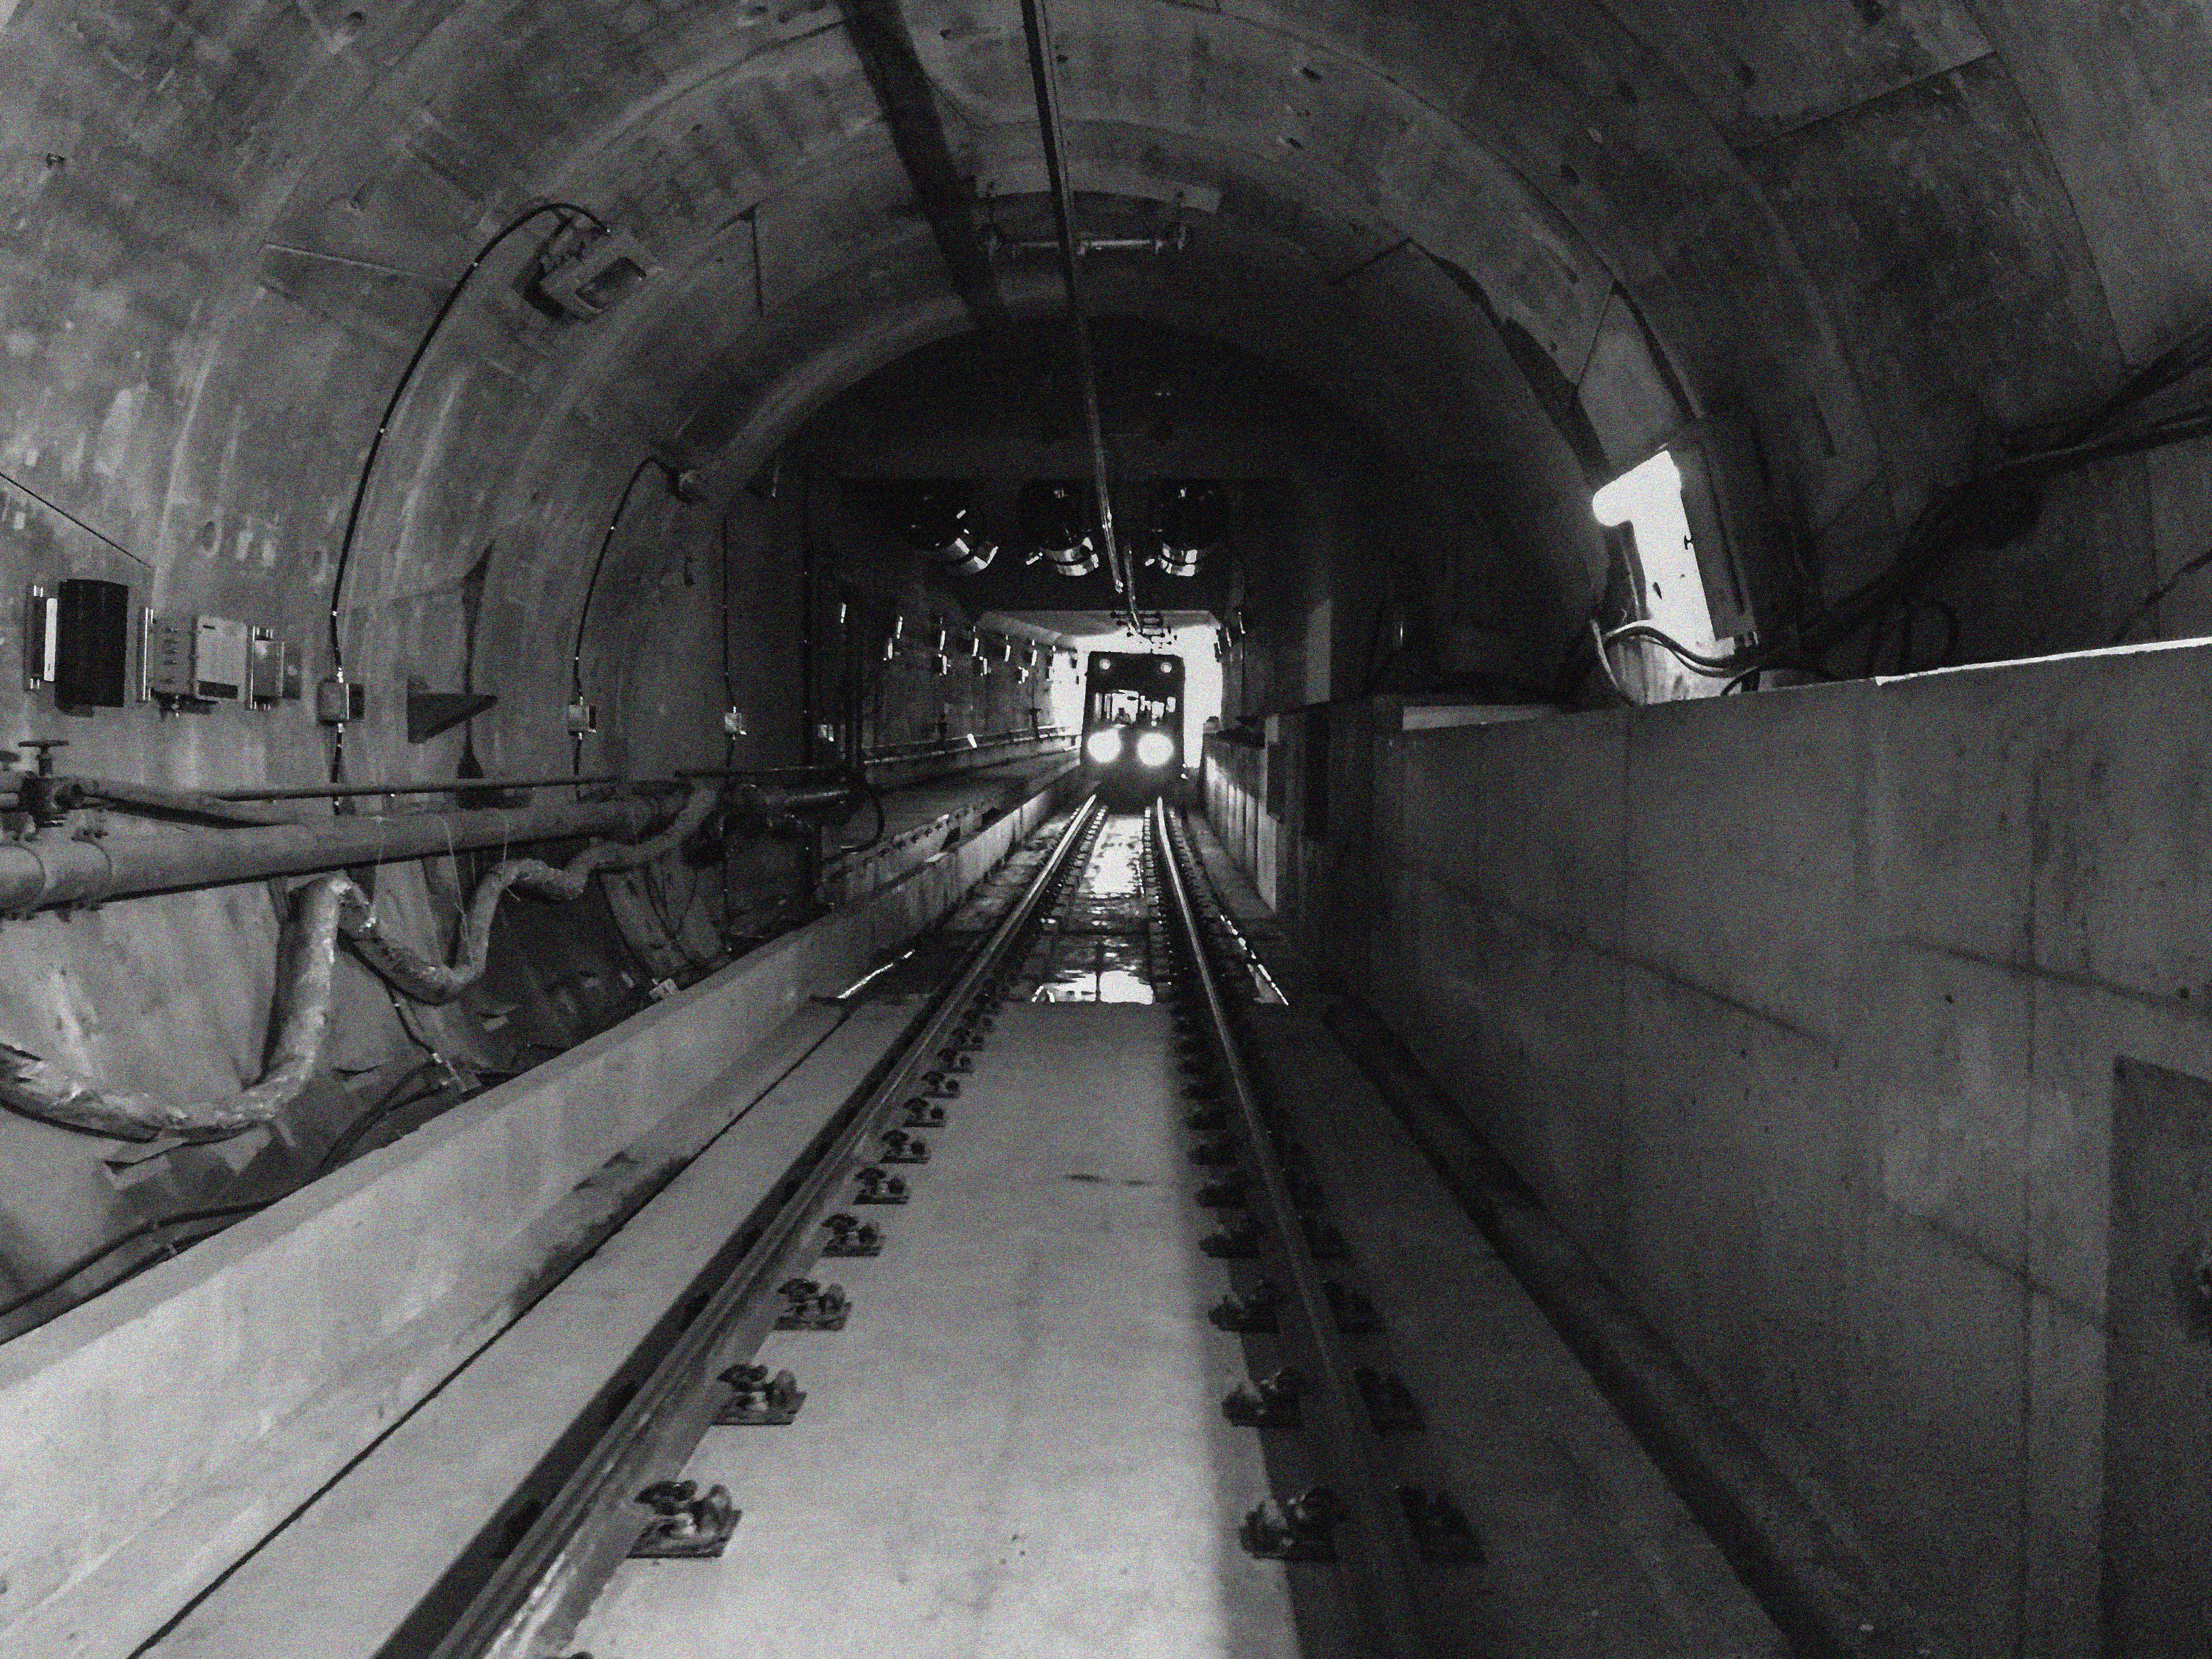 a LRV at the far end of a tunnel.